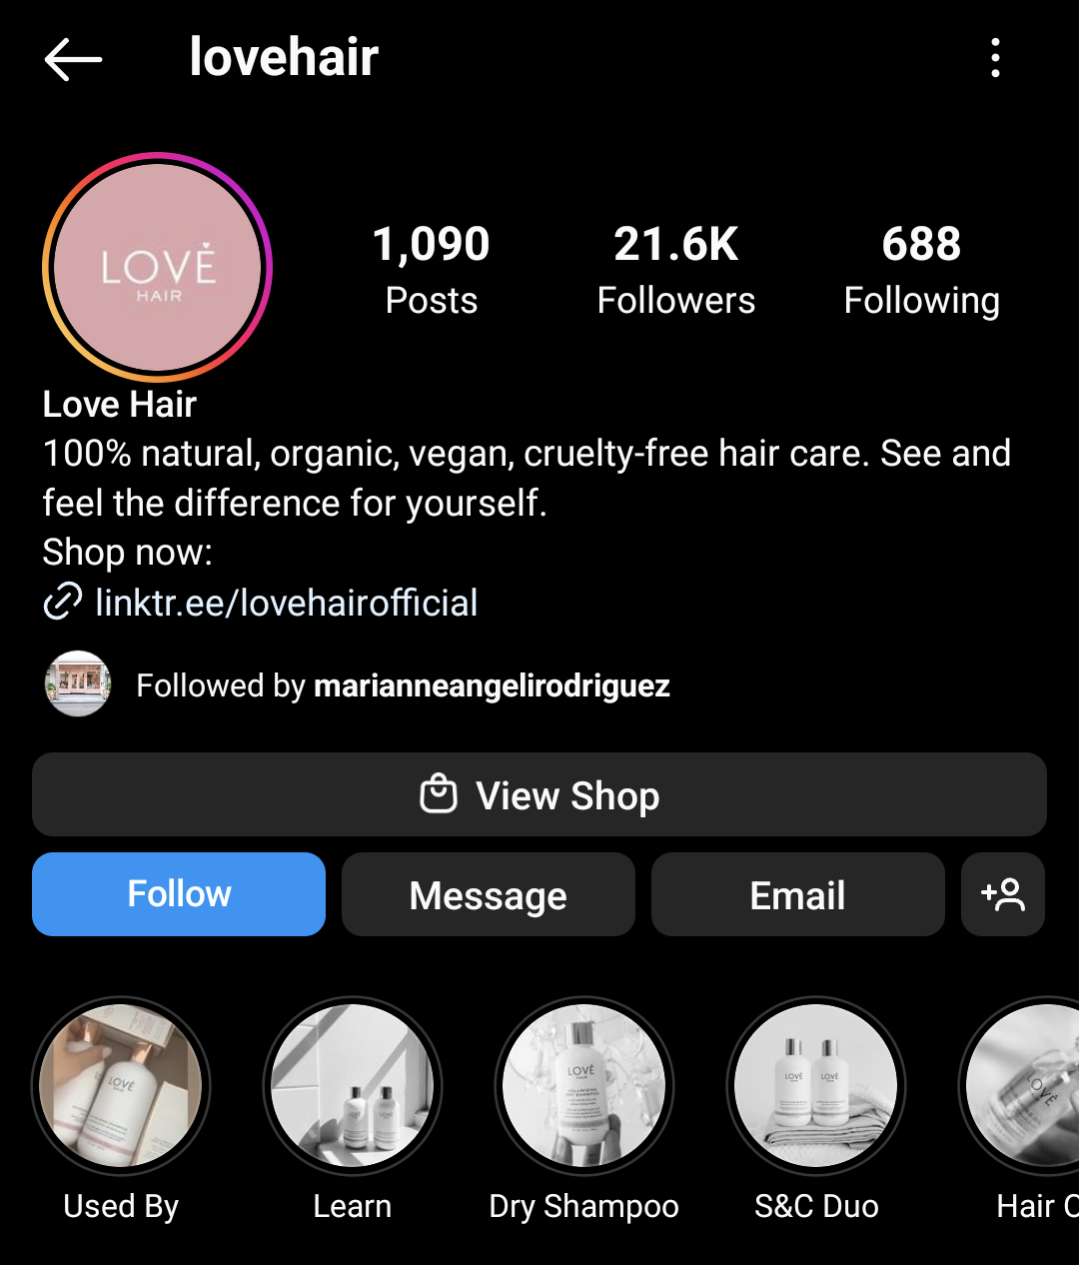 Love Hair uses its Instagram bio to drive users to its shop